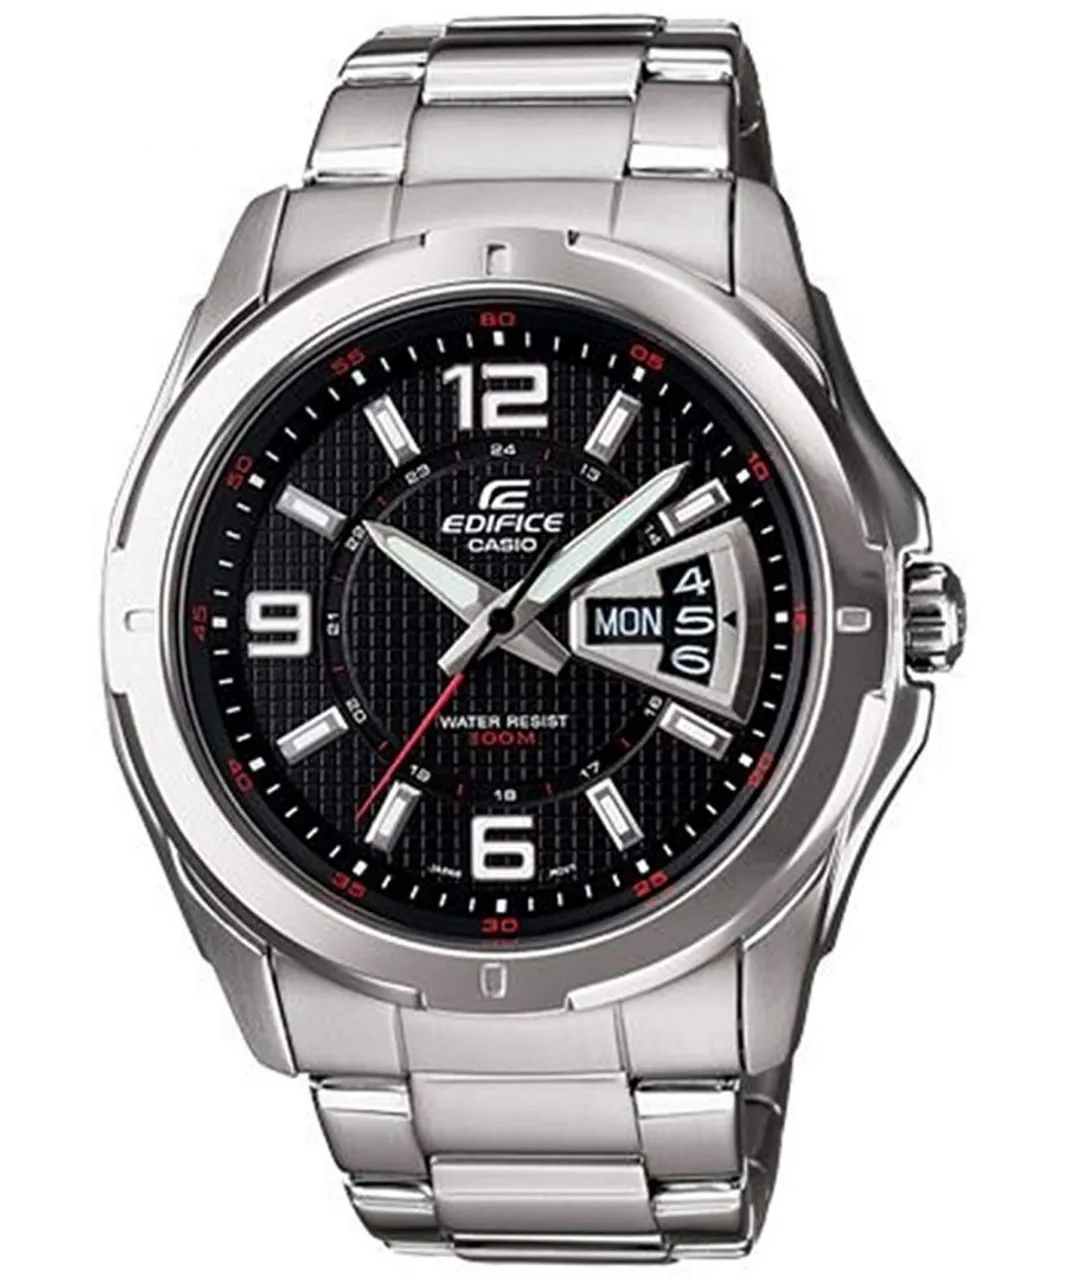 Casio Edifice Mens Silver Watch EF-129D-1AVEF Stainless Steel - One Size